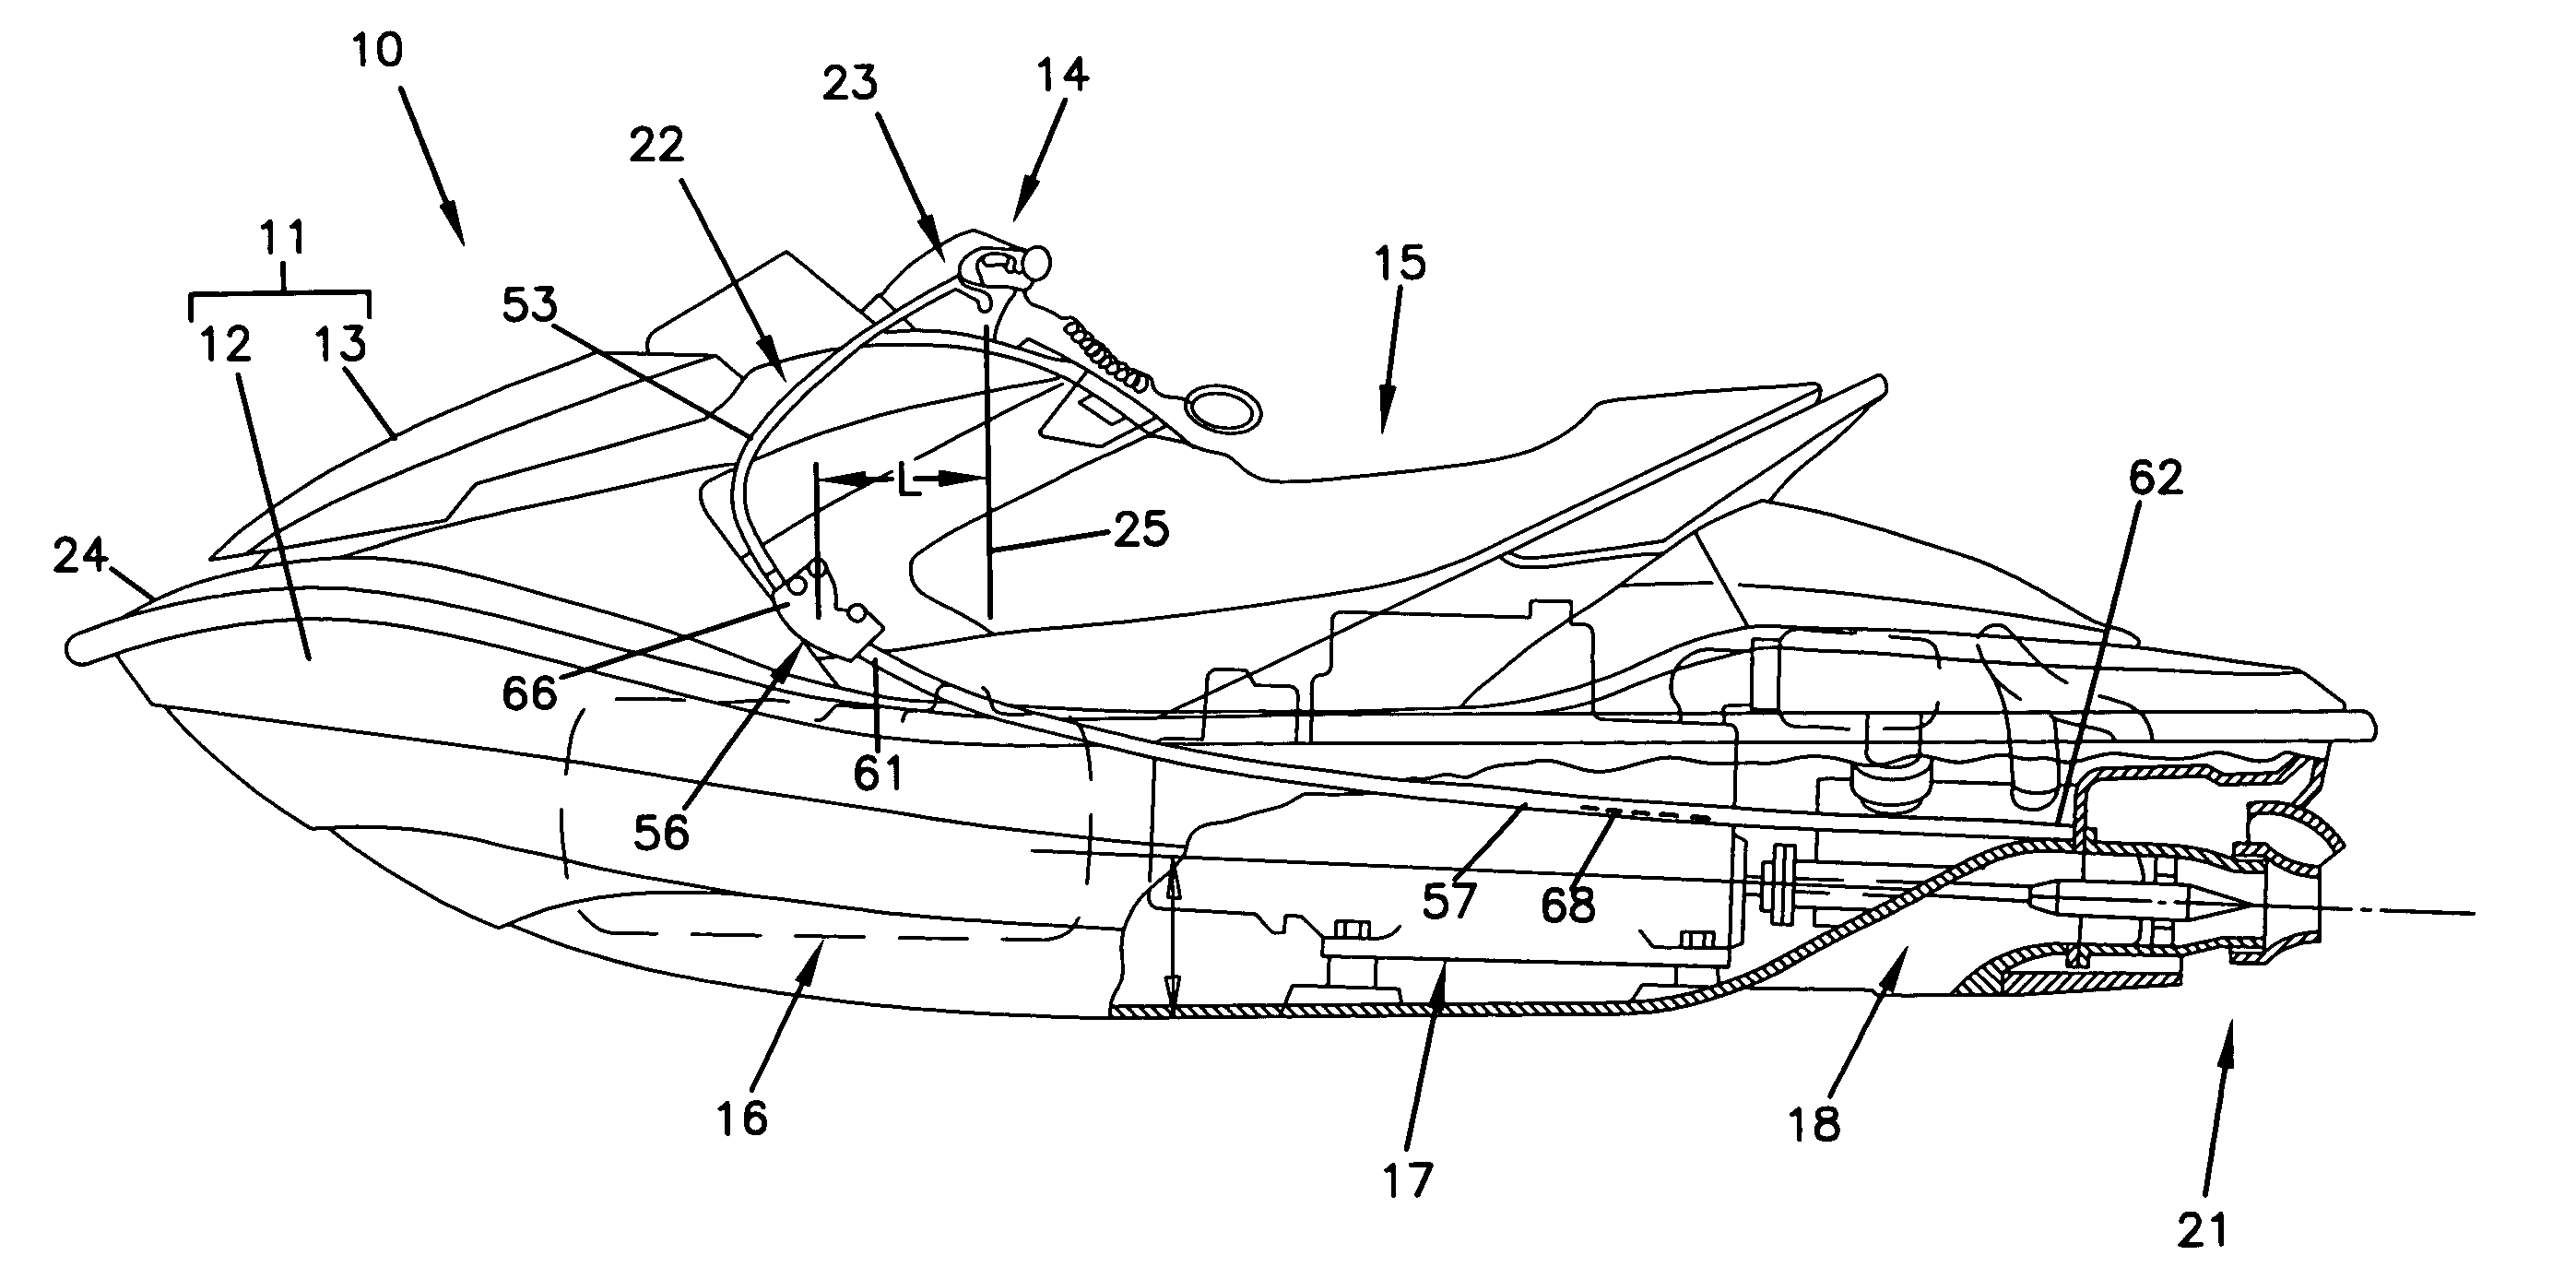 Trim operating wire structure for personal watercraft